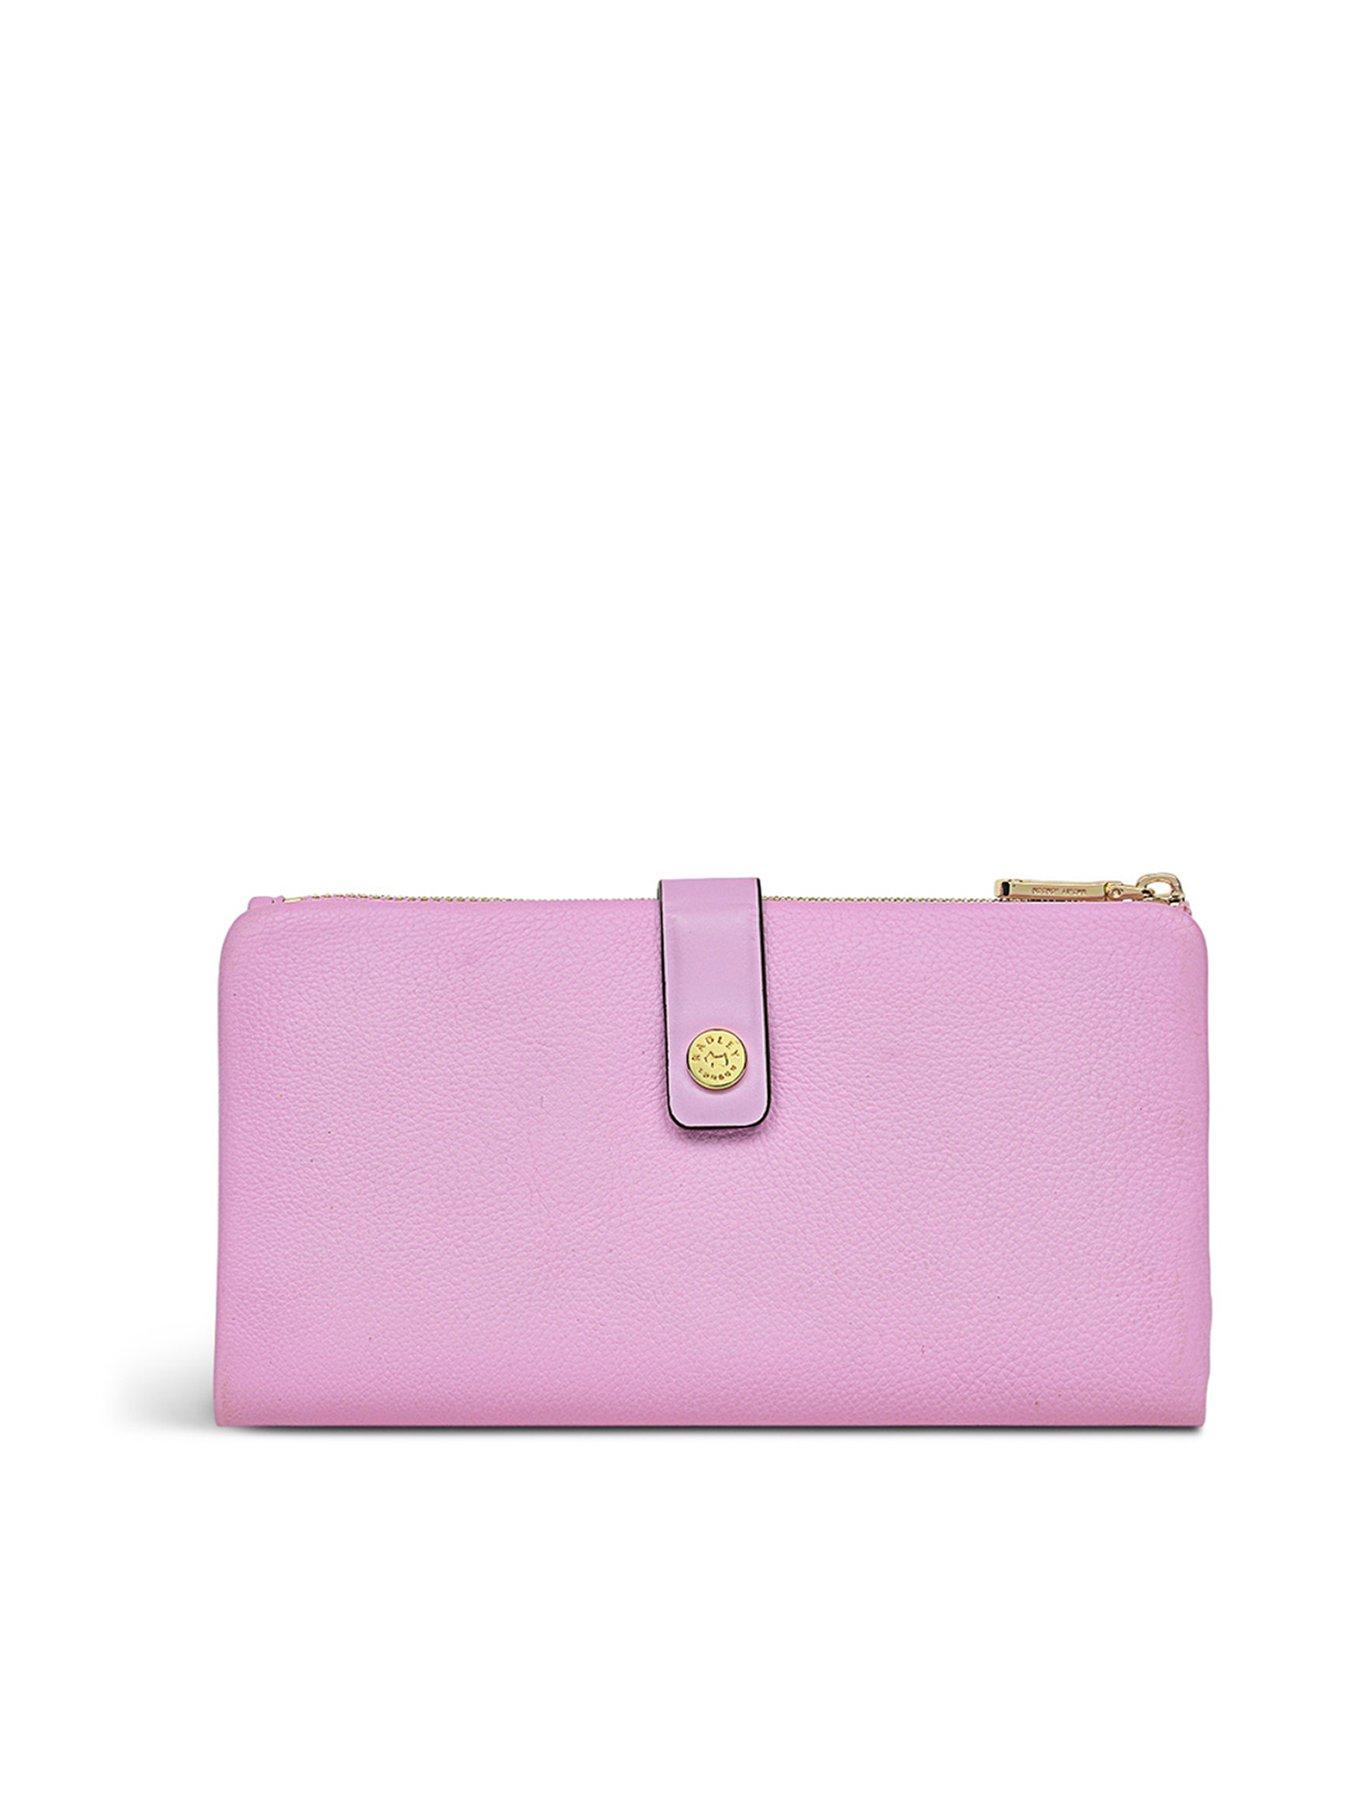 NWT - Radley London Pink Pebbled Leather Wristlet in Bright Pink | eBay